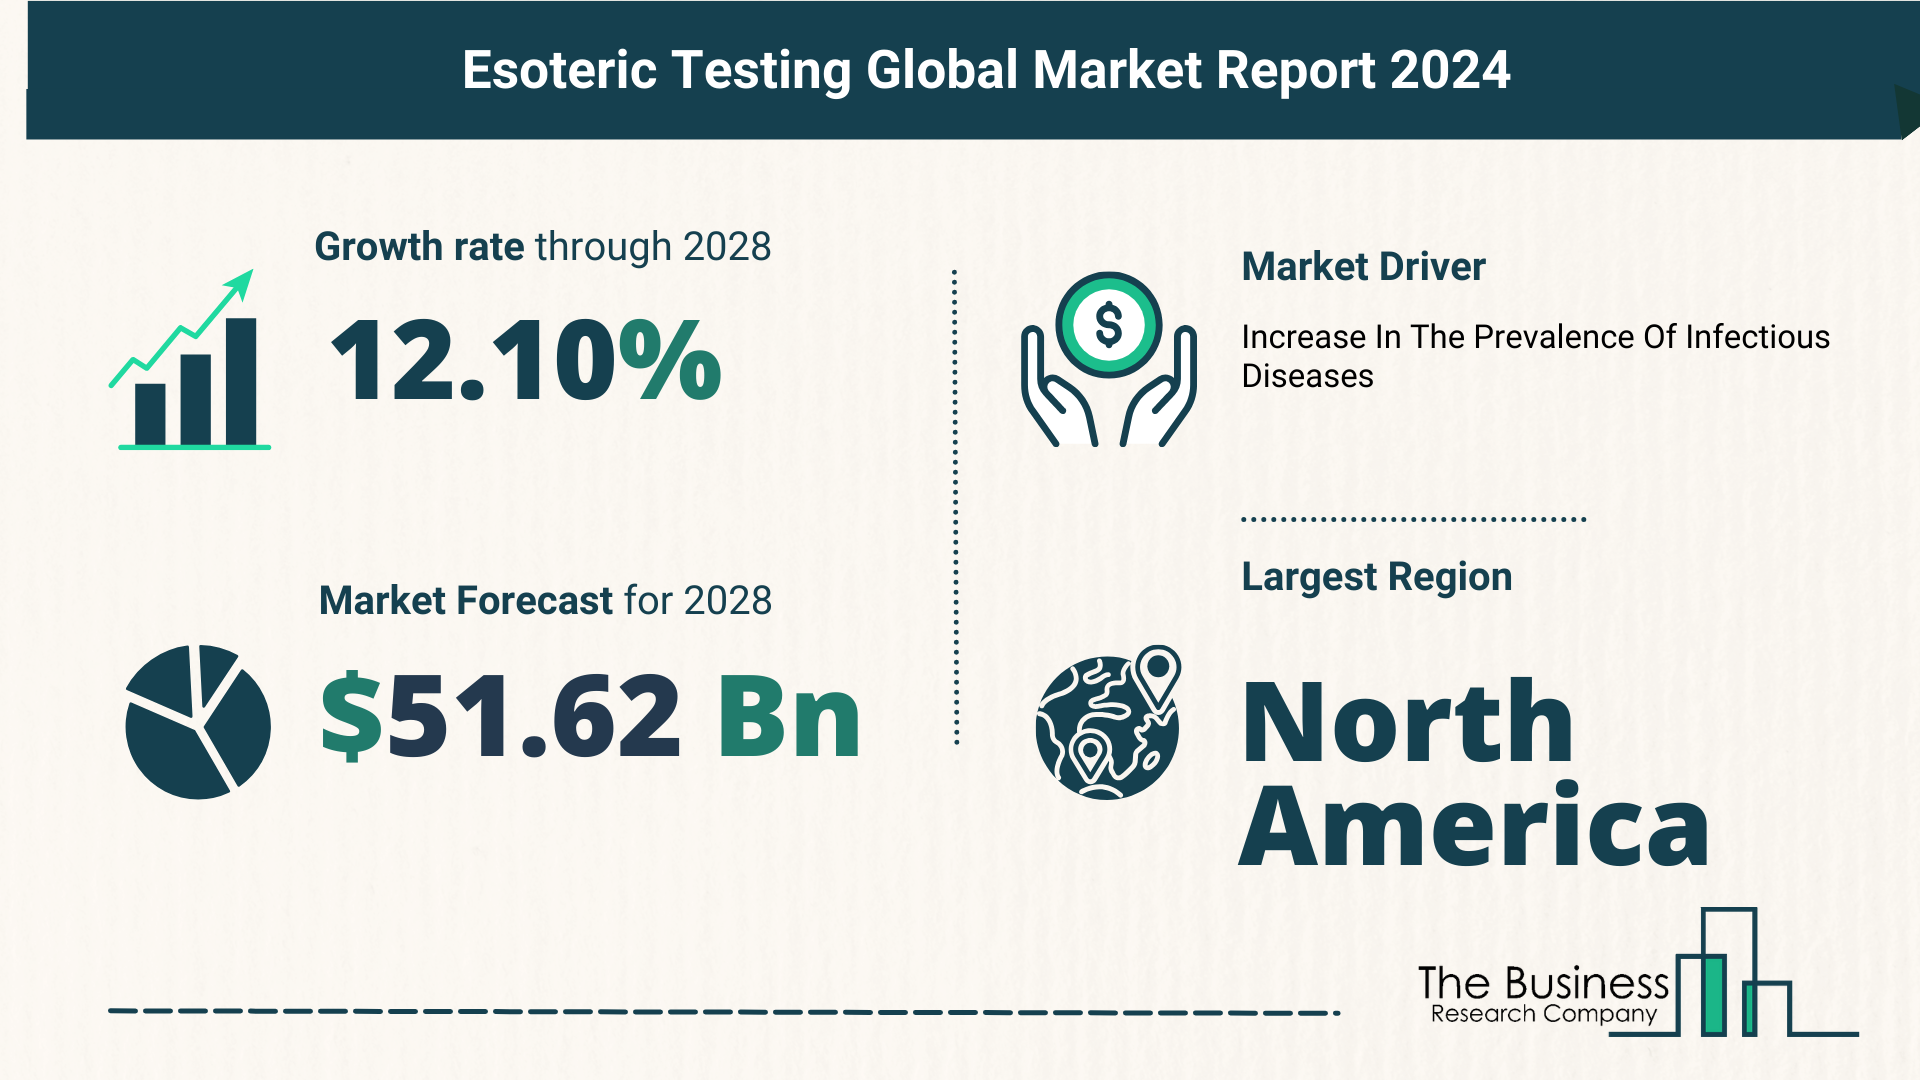 Key Takeaways From The Global Esoteric Testing Market Forecast 2024